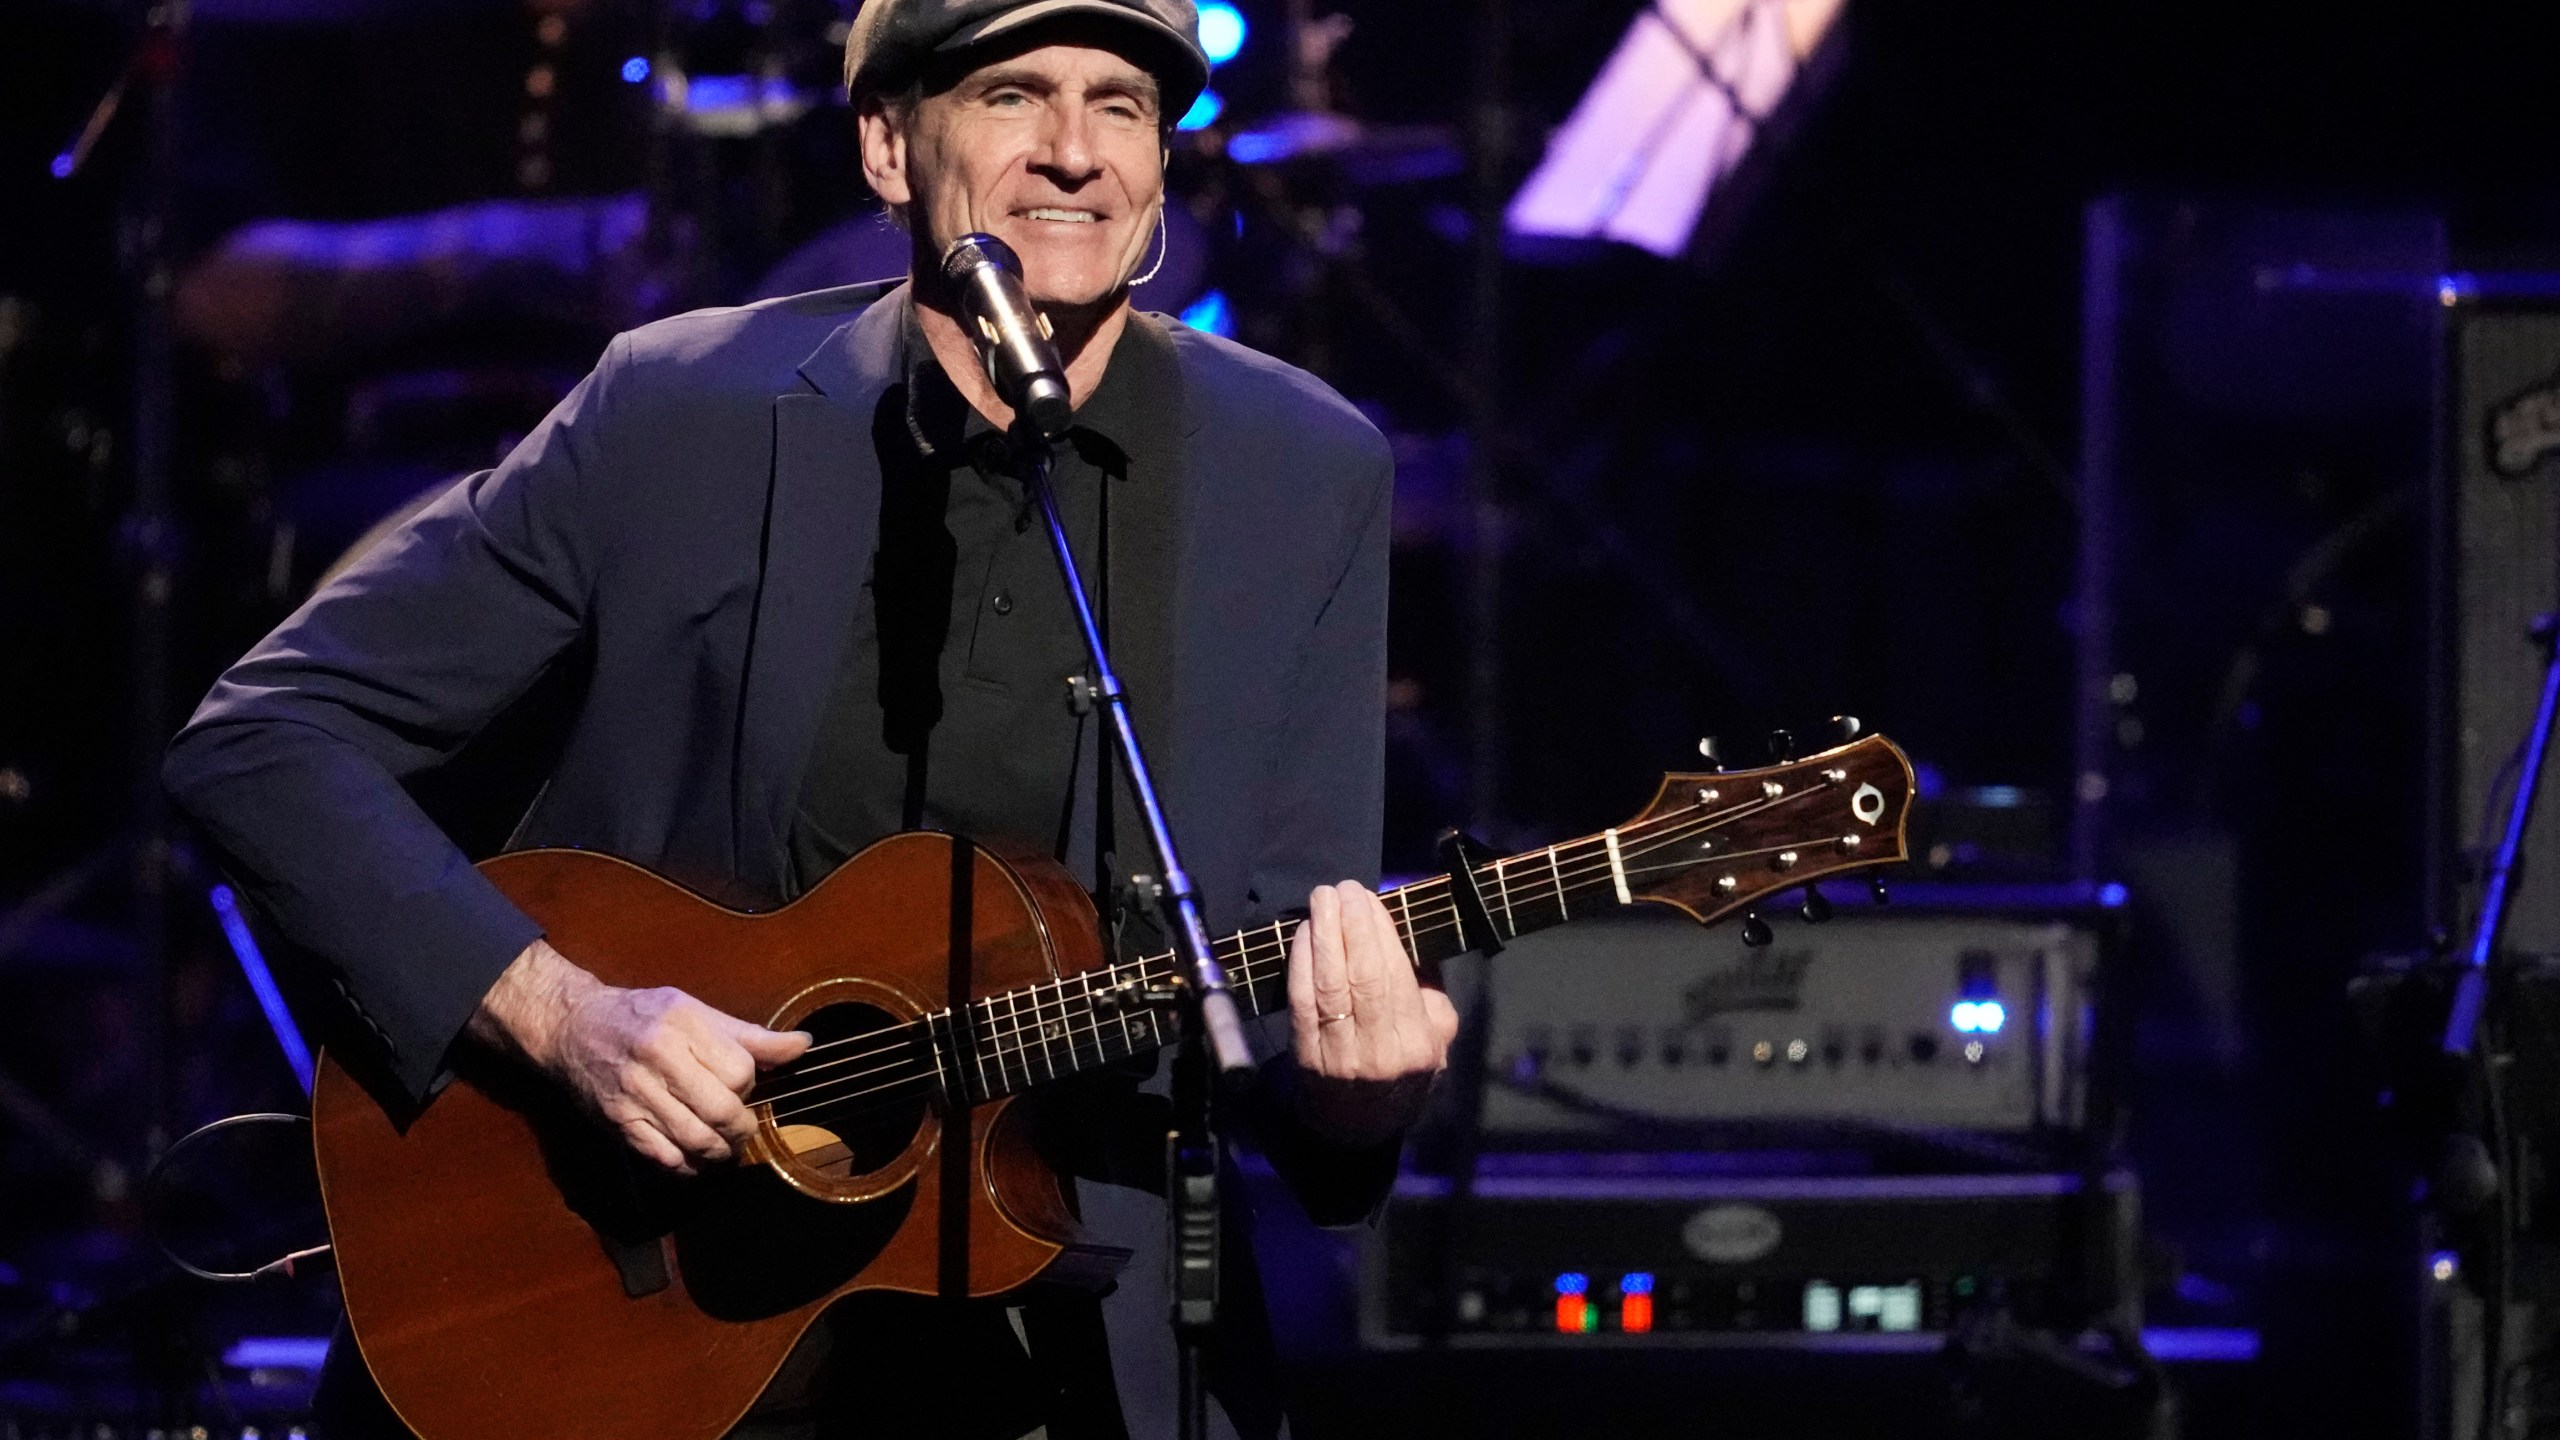 FILE - James Taylor performs at the 7th annual Love Rocks NYC concert in New York on March 9, 2023. Taylor kicks off his North American tour on May 29 at the Hollywood Bowl in Los Angeles. (Photo by Charles Sykes/Invision/AP, File)